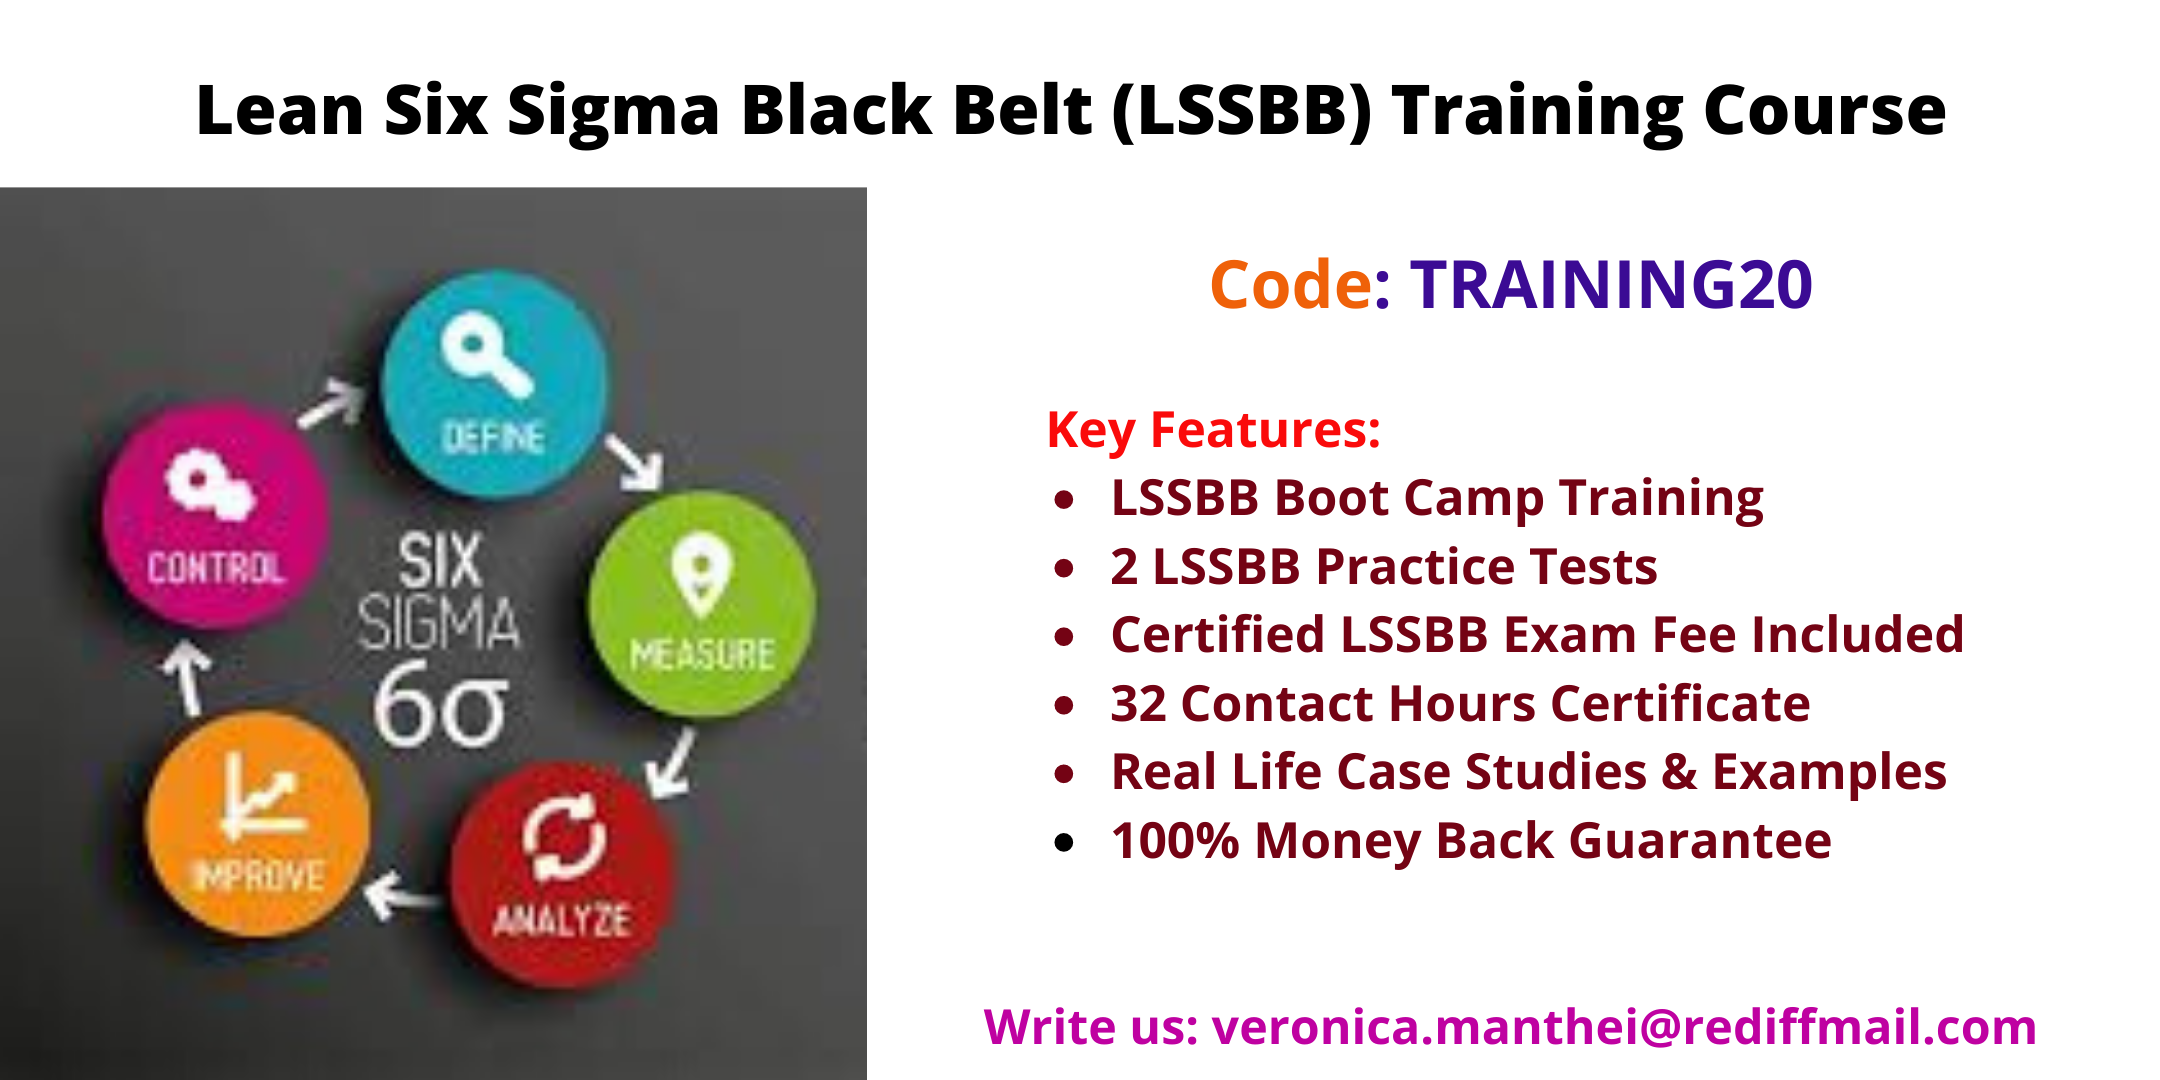 LSSBB Certification Course in Washington, DC